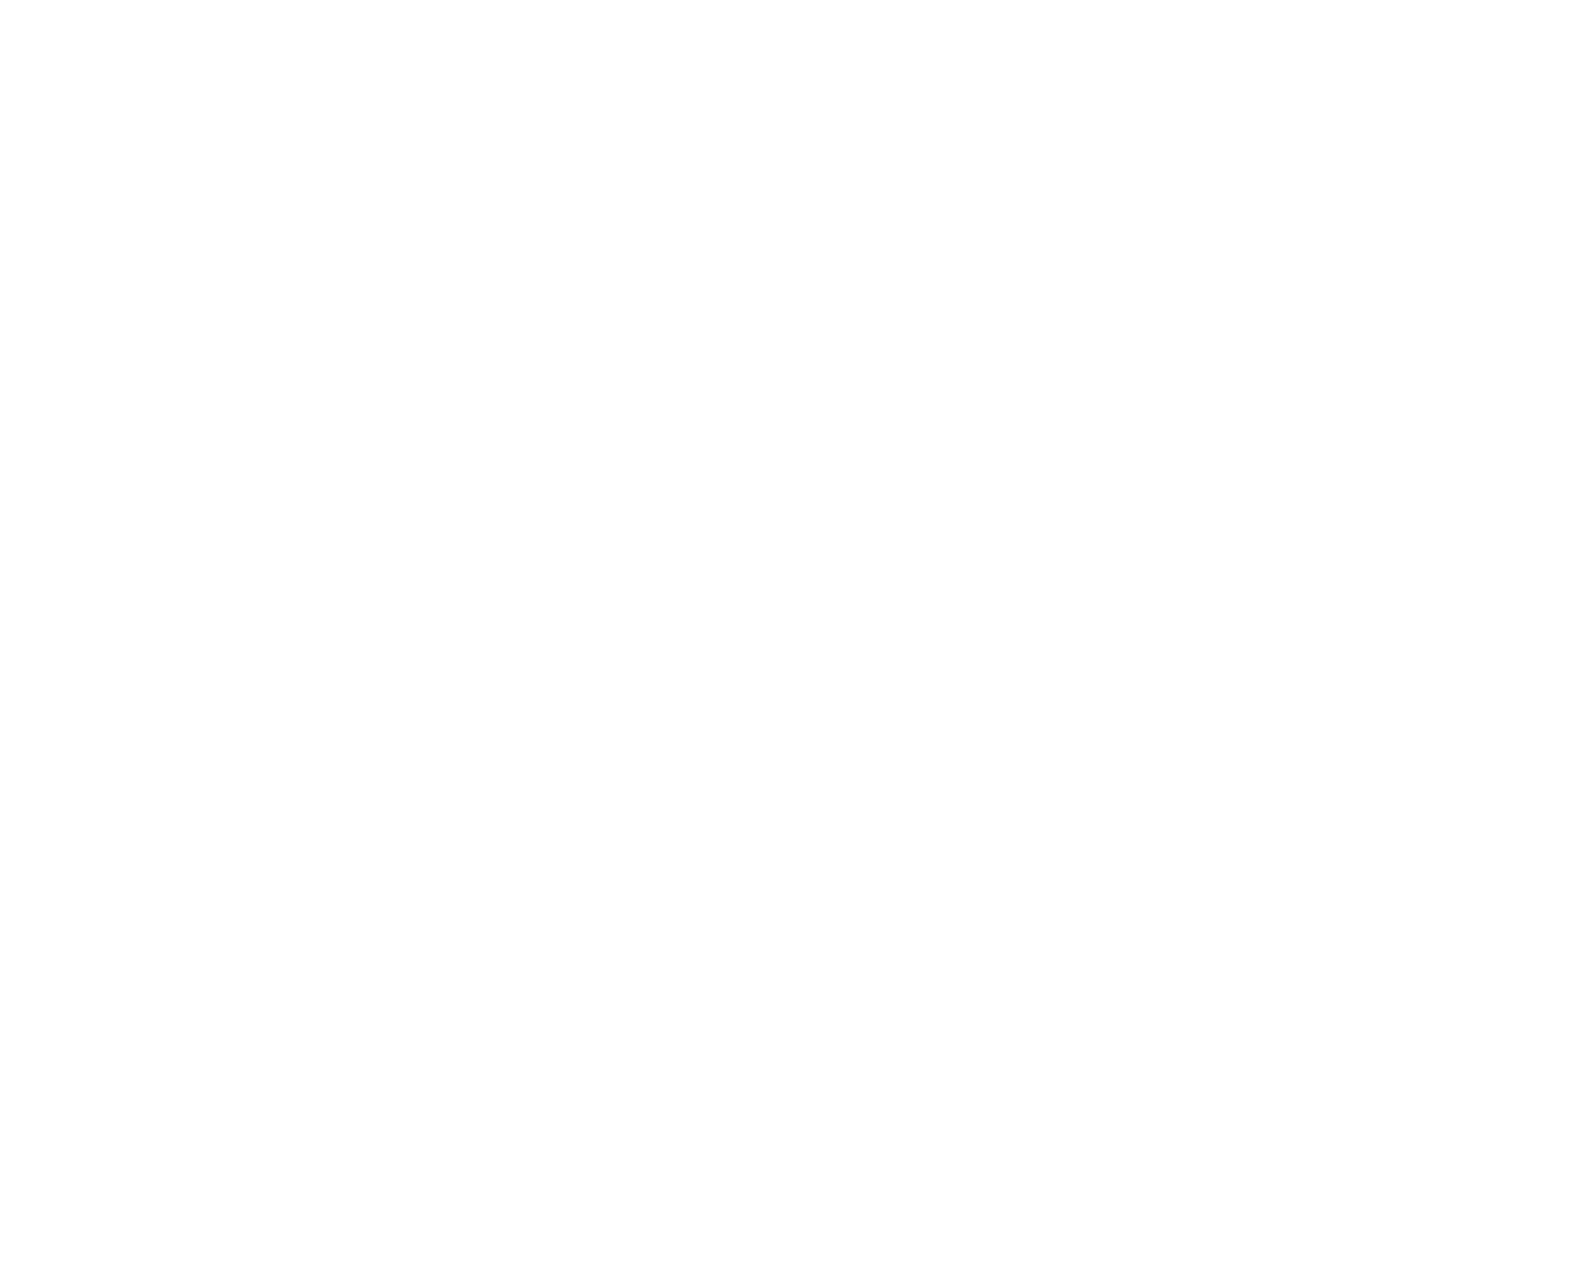 Local Bounti logo large for dark backgrounds (transparent PNG)